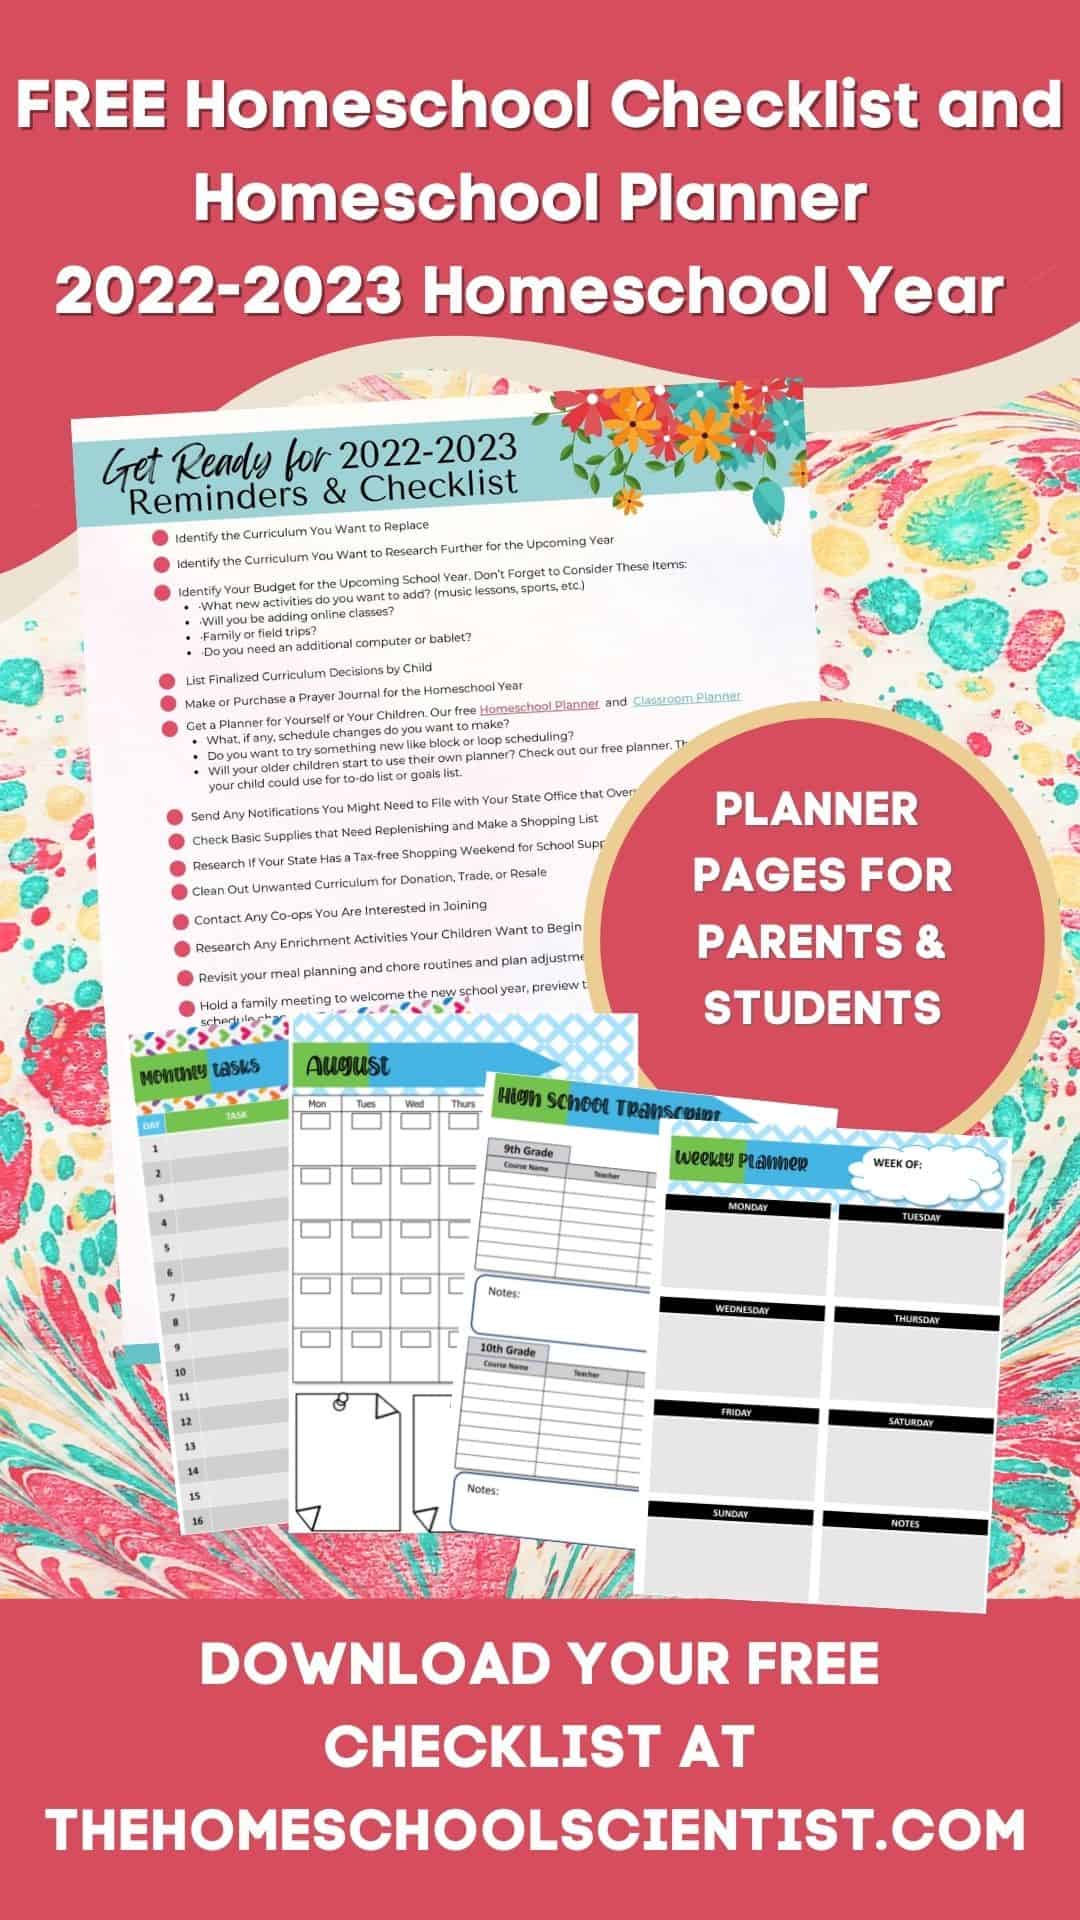 how to homeschool free homeschool planner and checklist